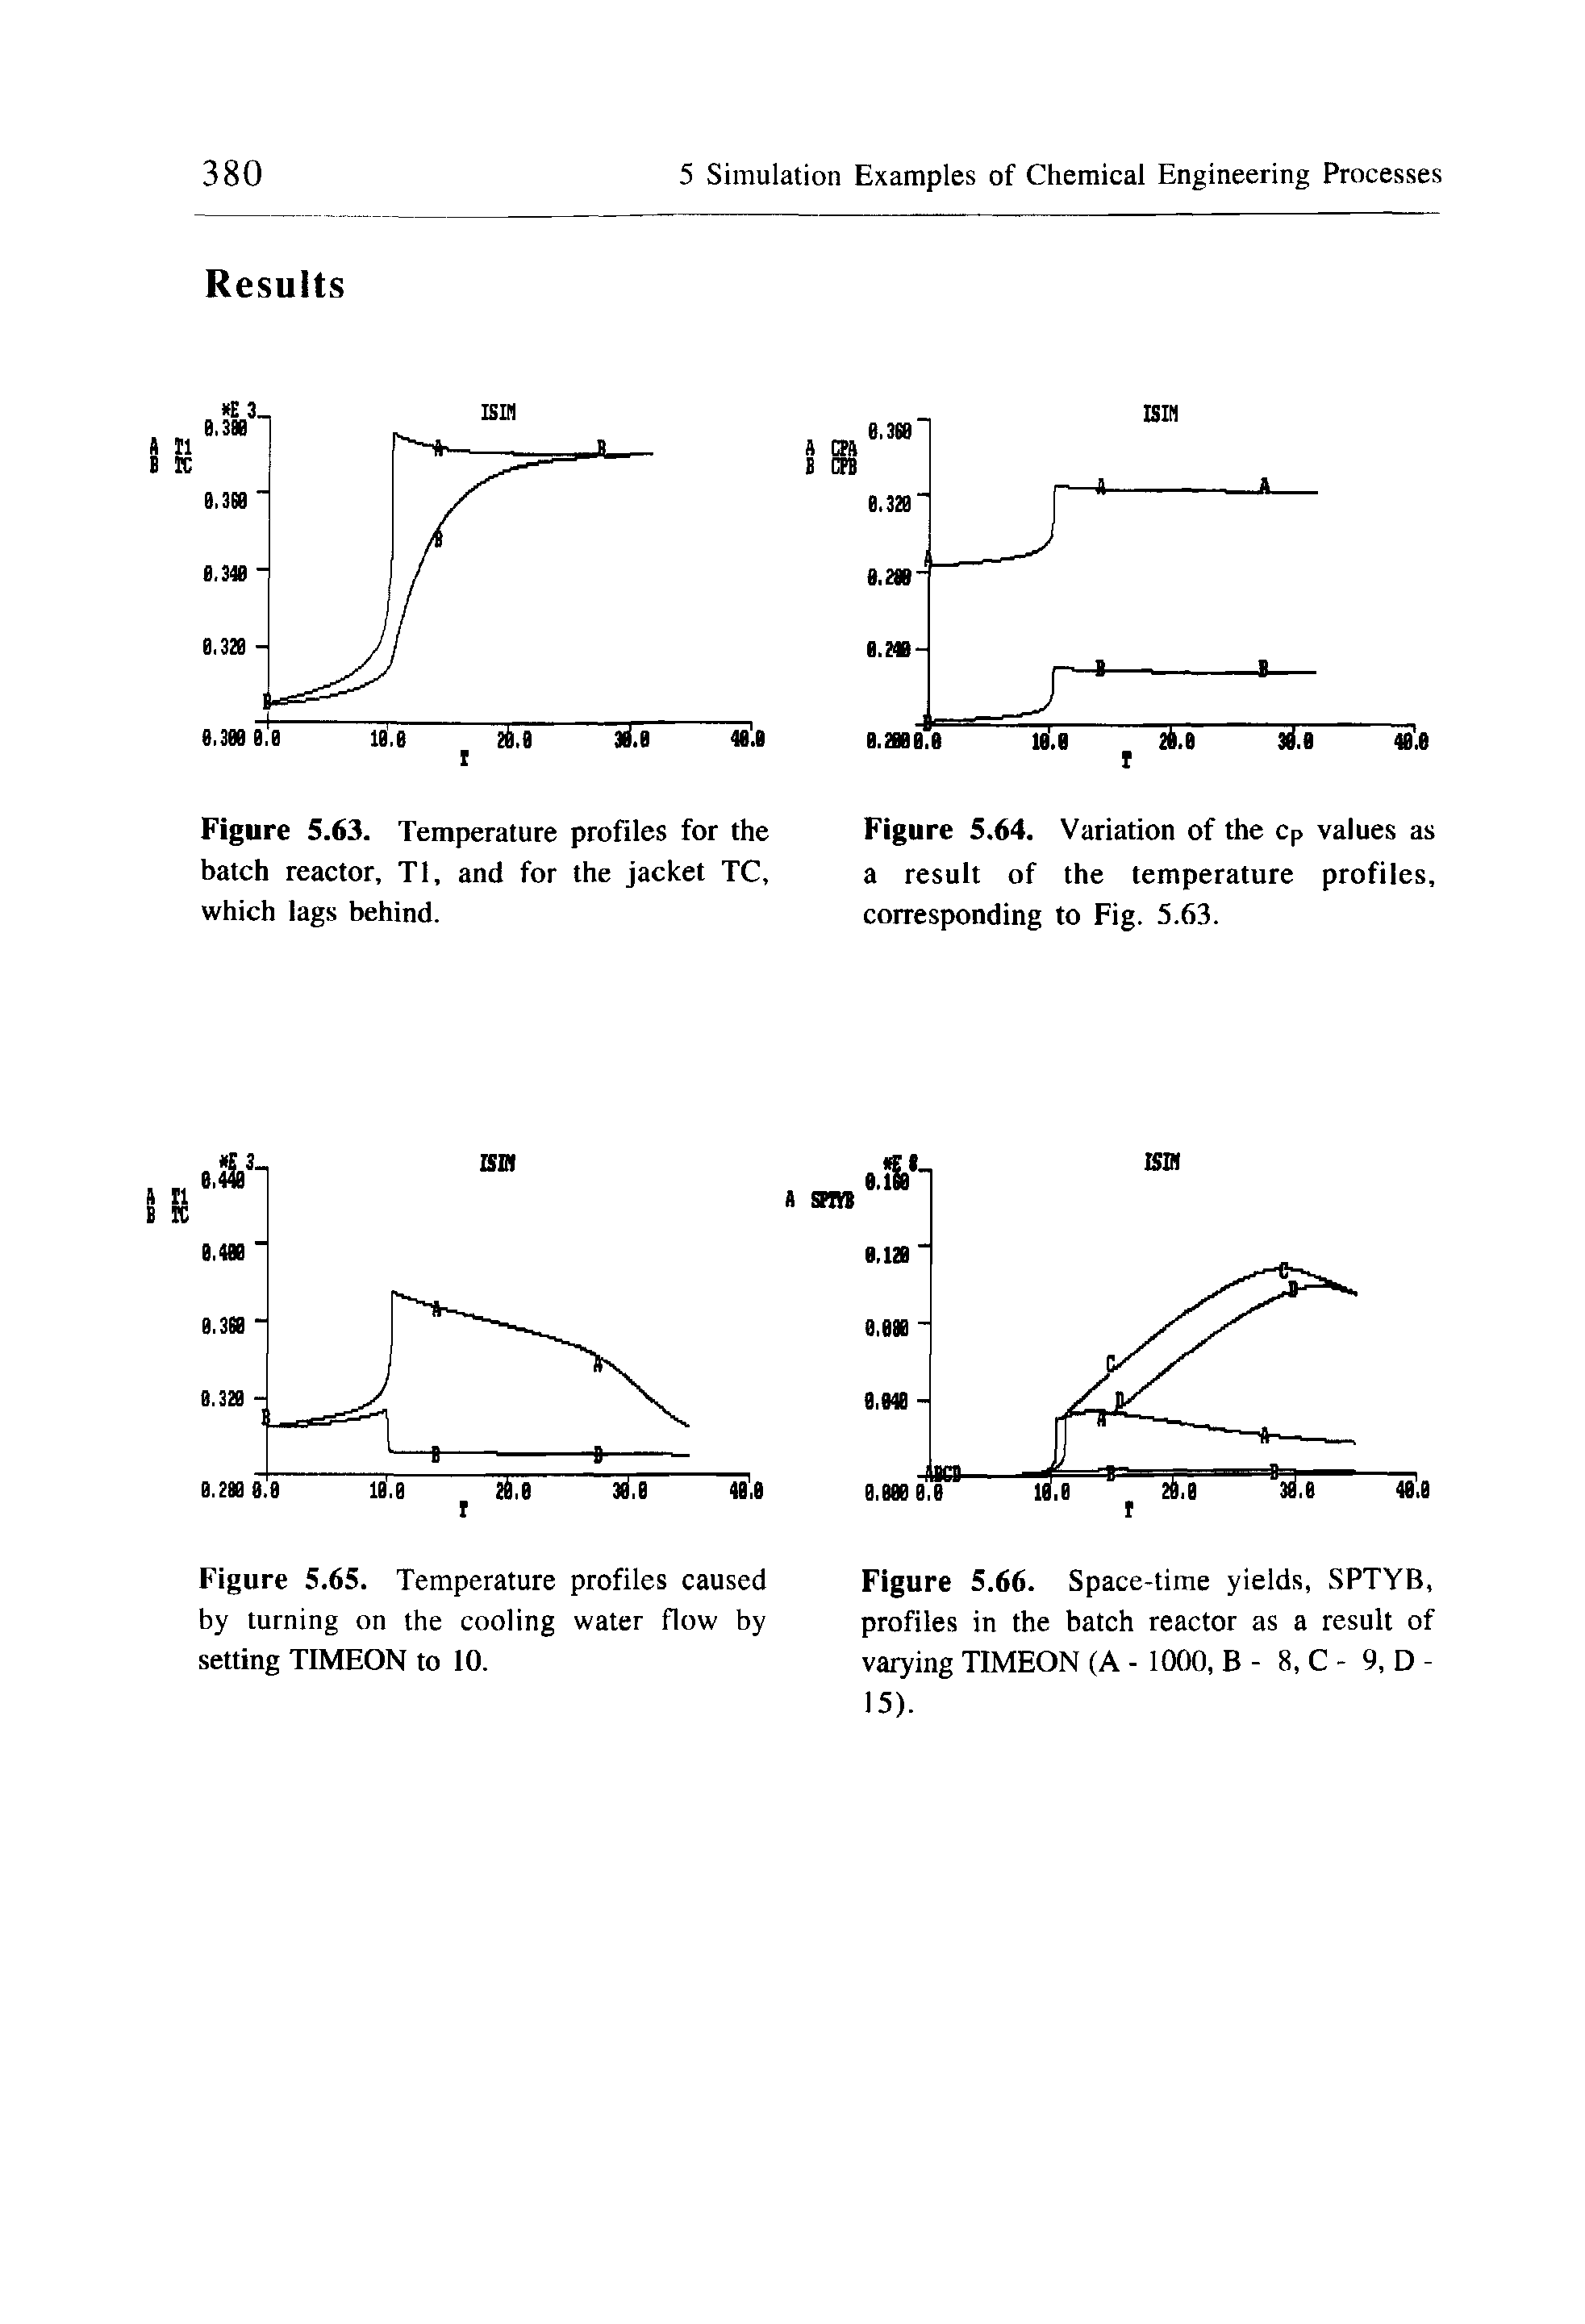 Figure 5.63. Temperature profiles for the batch reactor, Tl, and for the jacket TC, which lags behind.